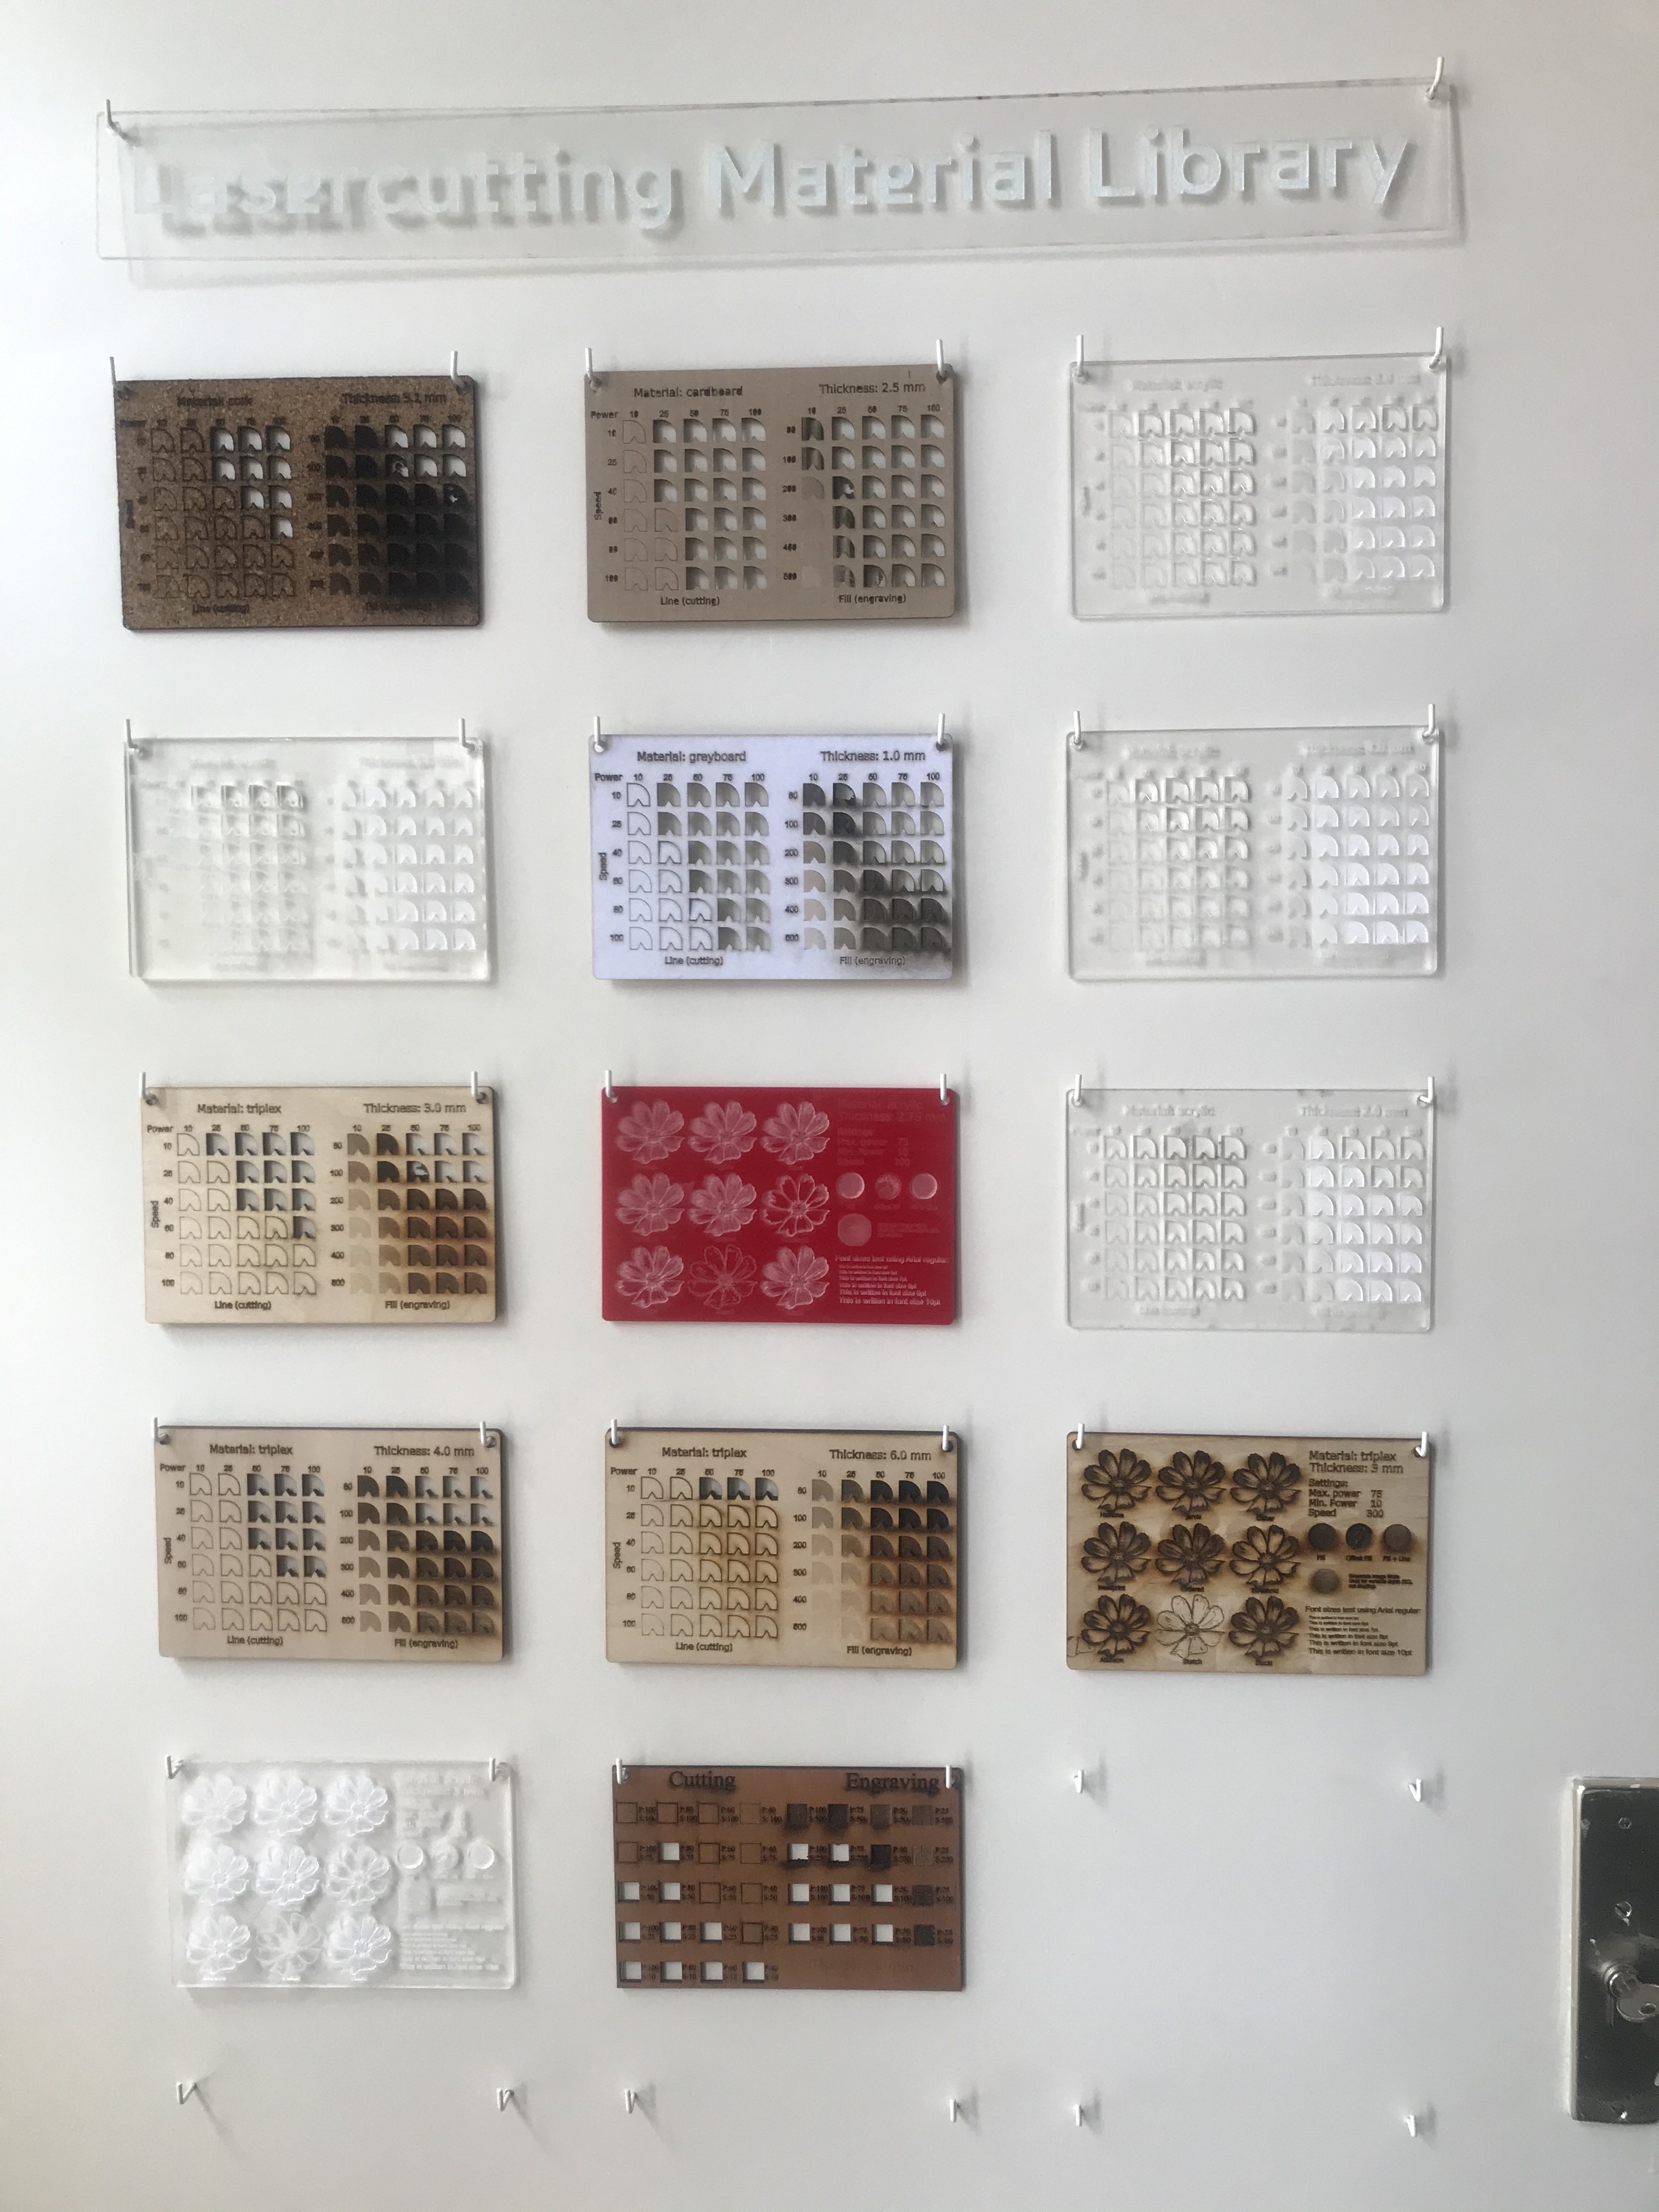 lasercutting_material_library